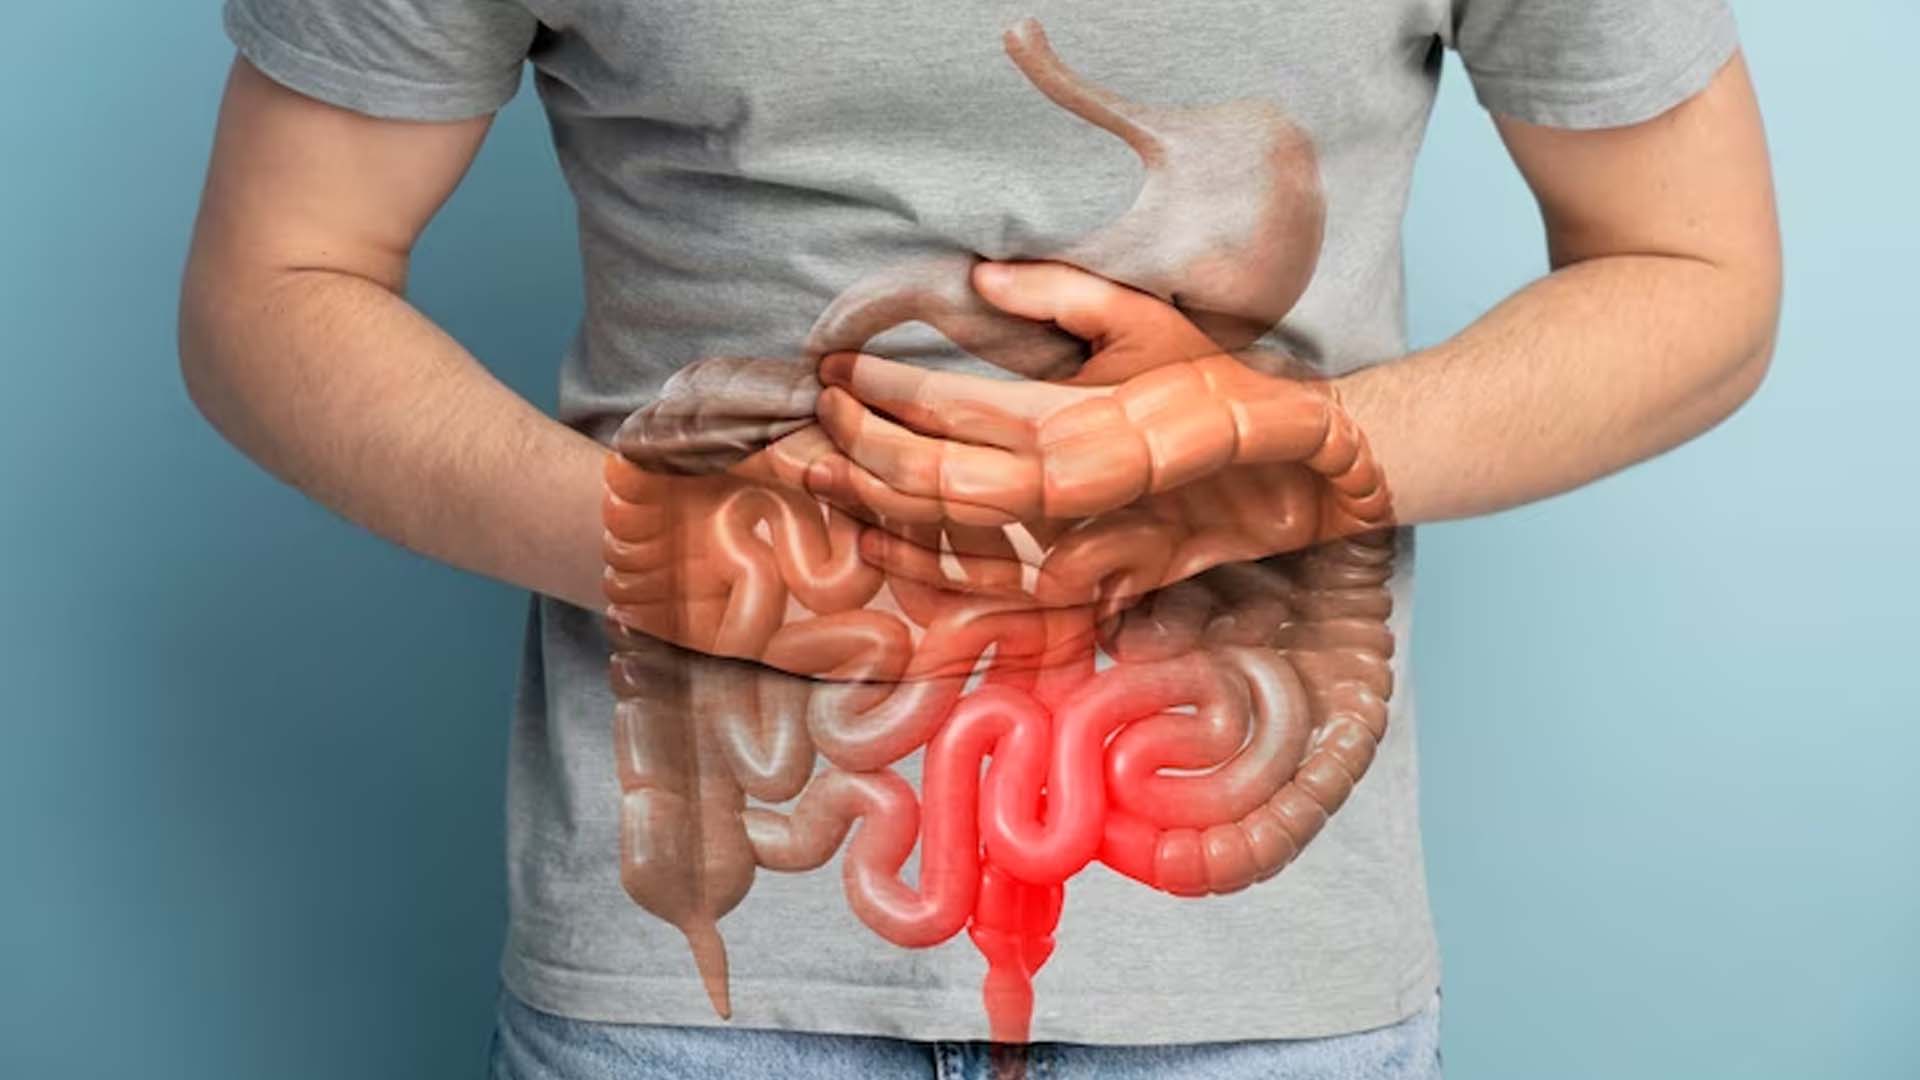 What are the Home Remedies for Irritable Bowel Syndrome (IBS)?